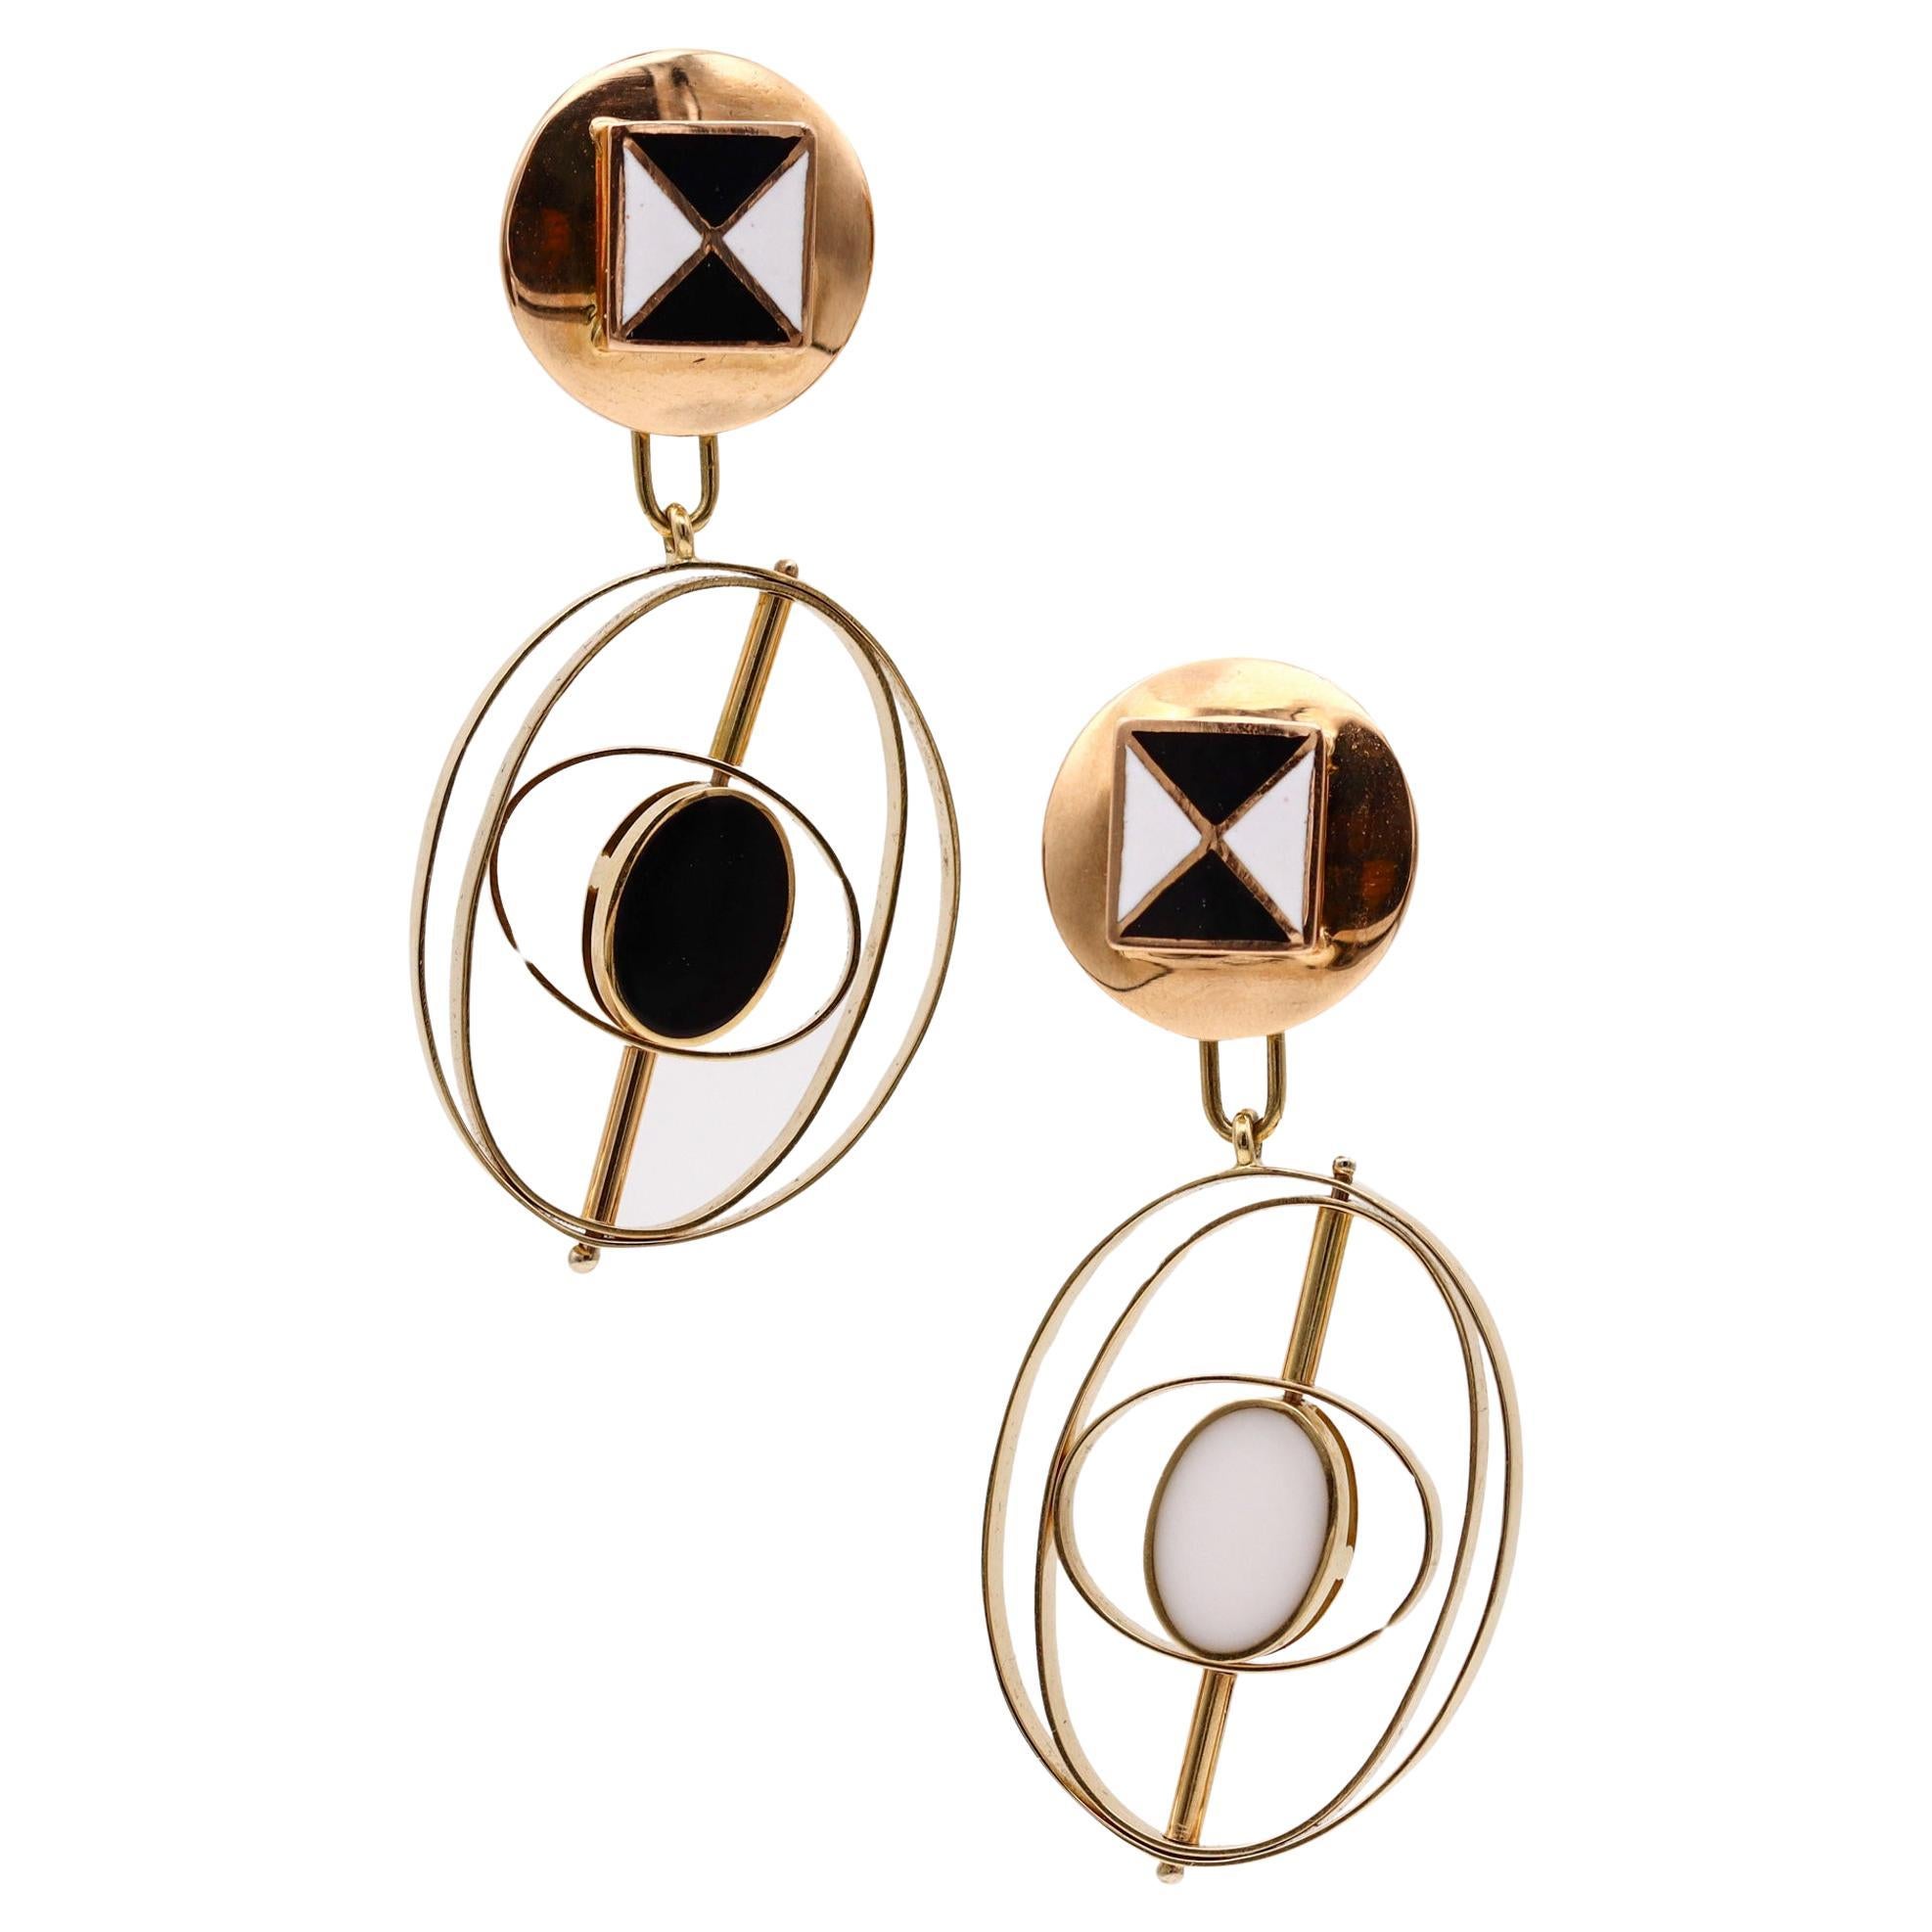 Giorgio Facchini Sculptural Kinetic Convertible earrings In 18Kt Yellow Gold For Sale